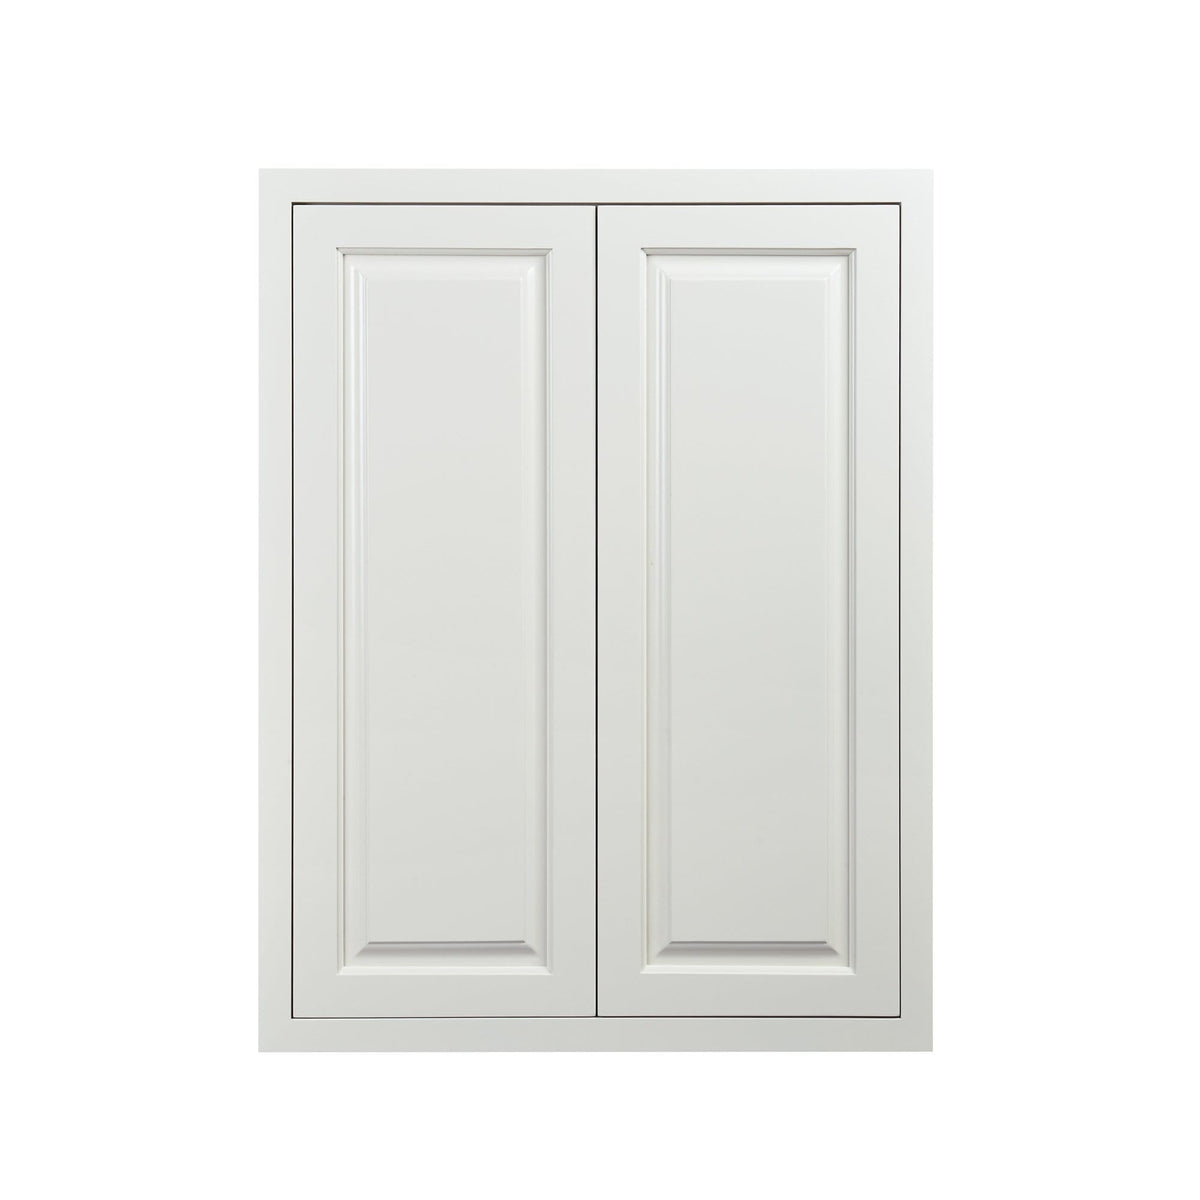 39" Tall Vintage White Inset Raised Panel Wall Cabinet - Double Door 24", 27", 30", 33" & 36"